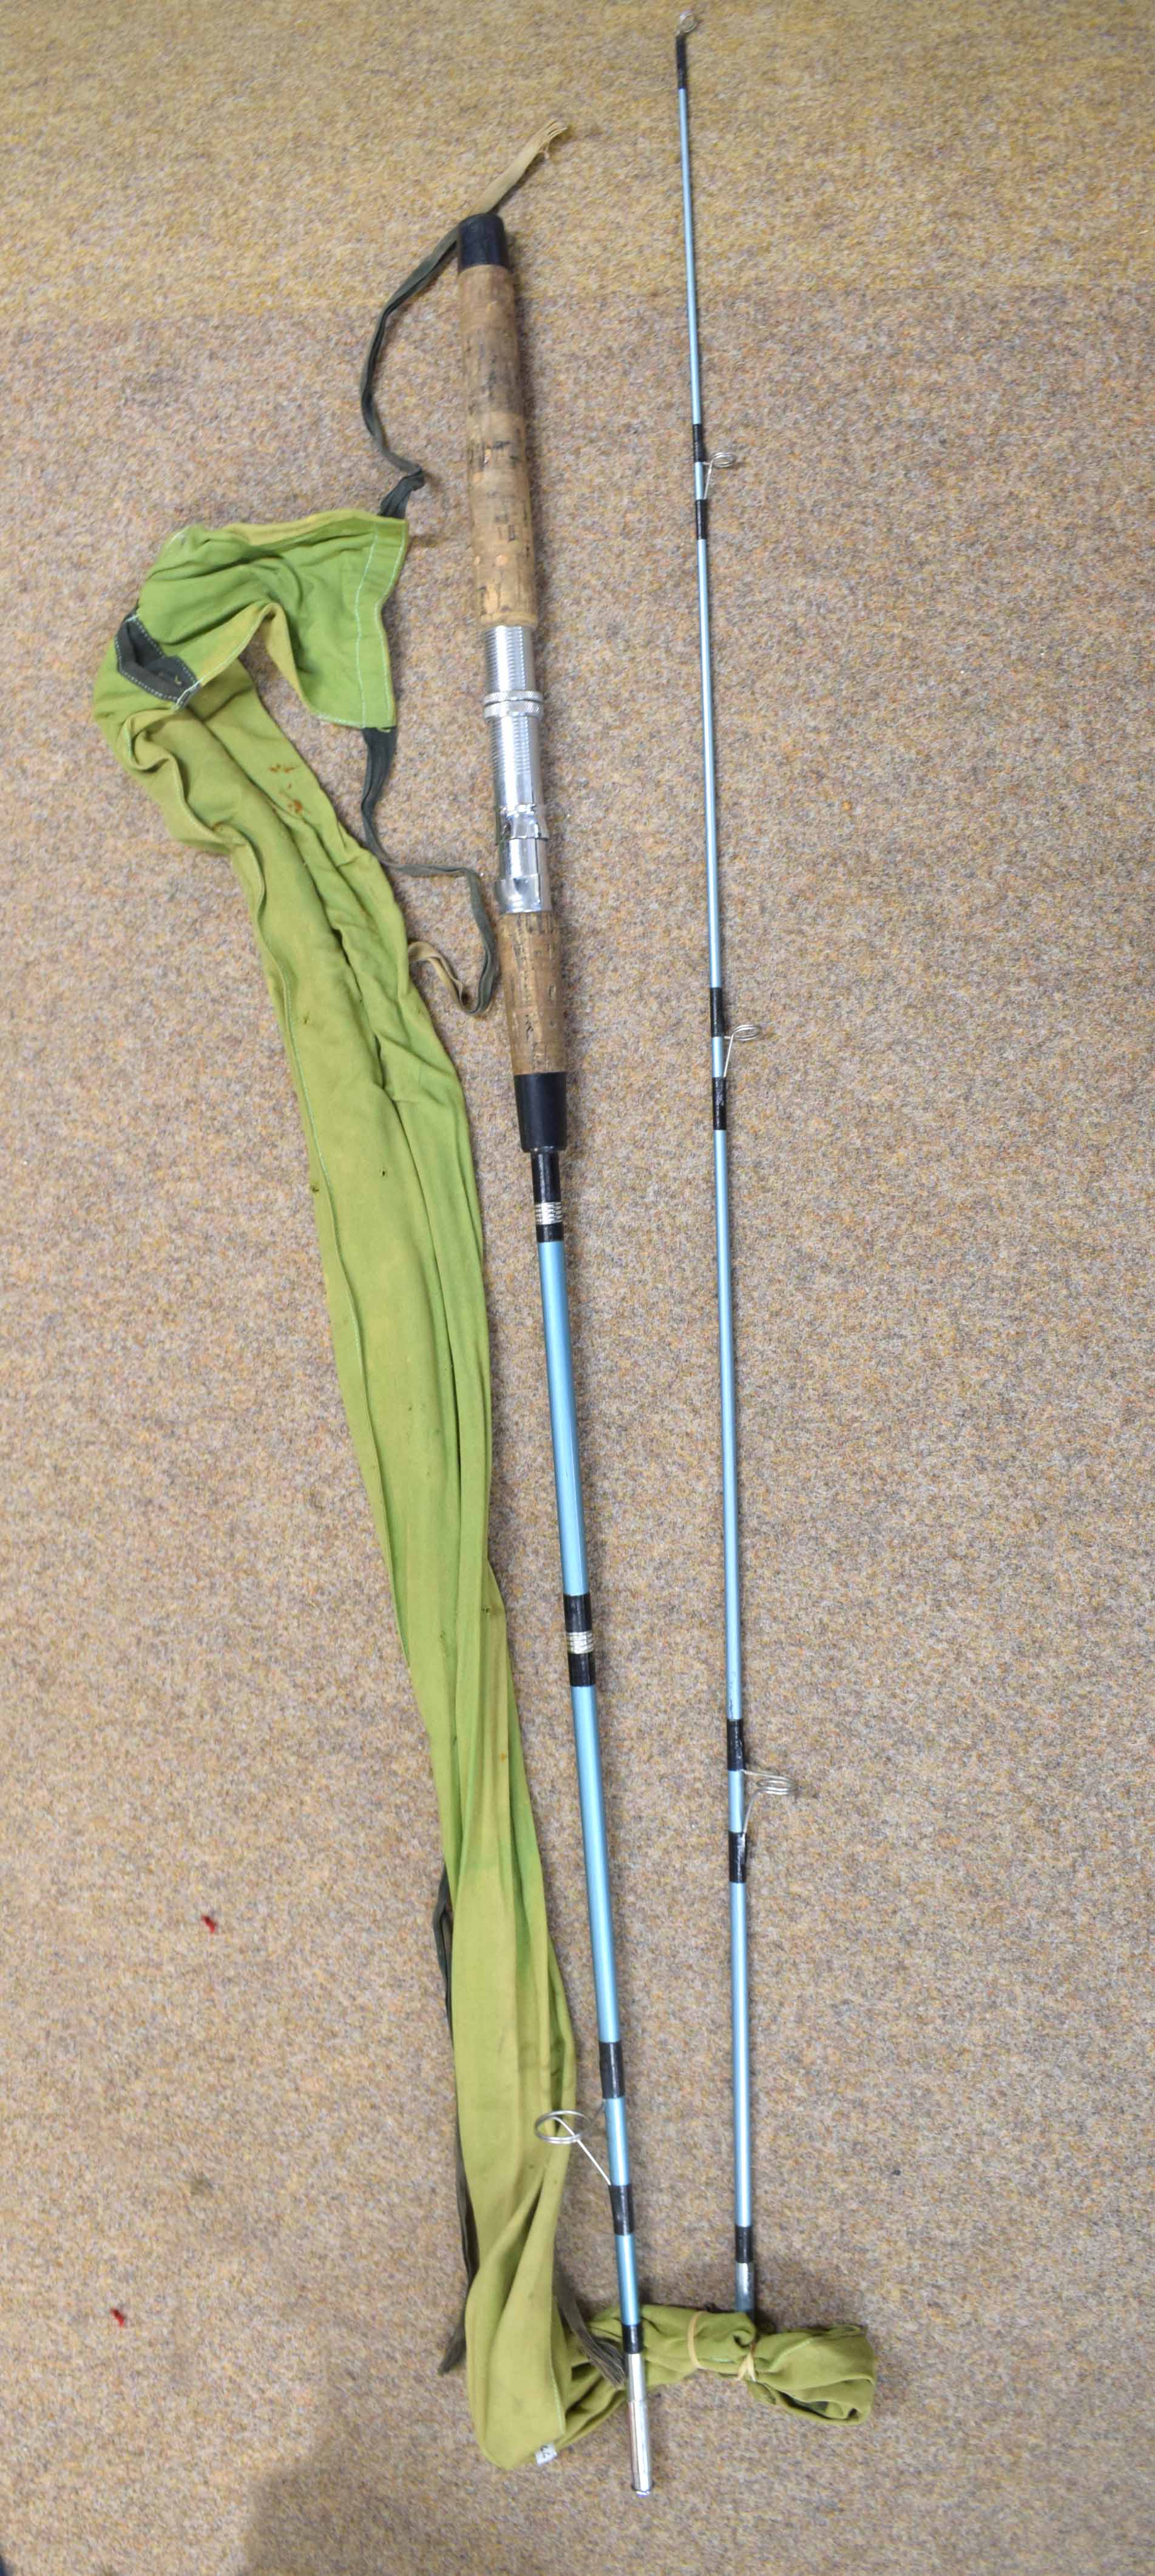 DAIWA 2 PIECE Fishing Rod together with 2 further Fishing Rods (3) - Image 7 of 7